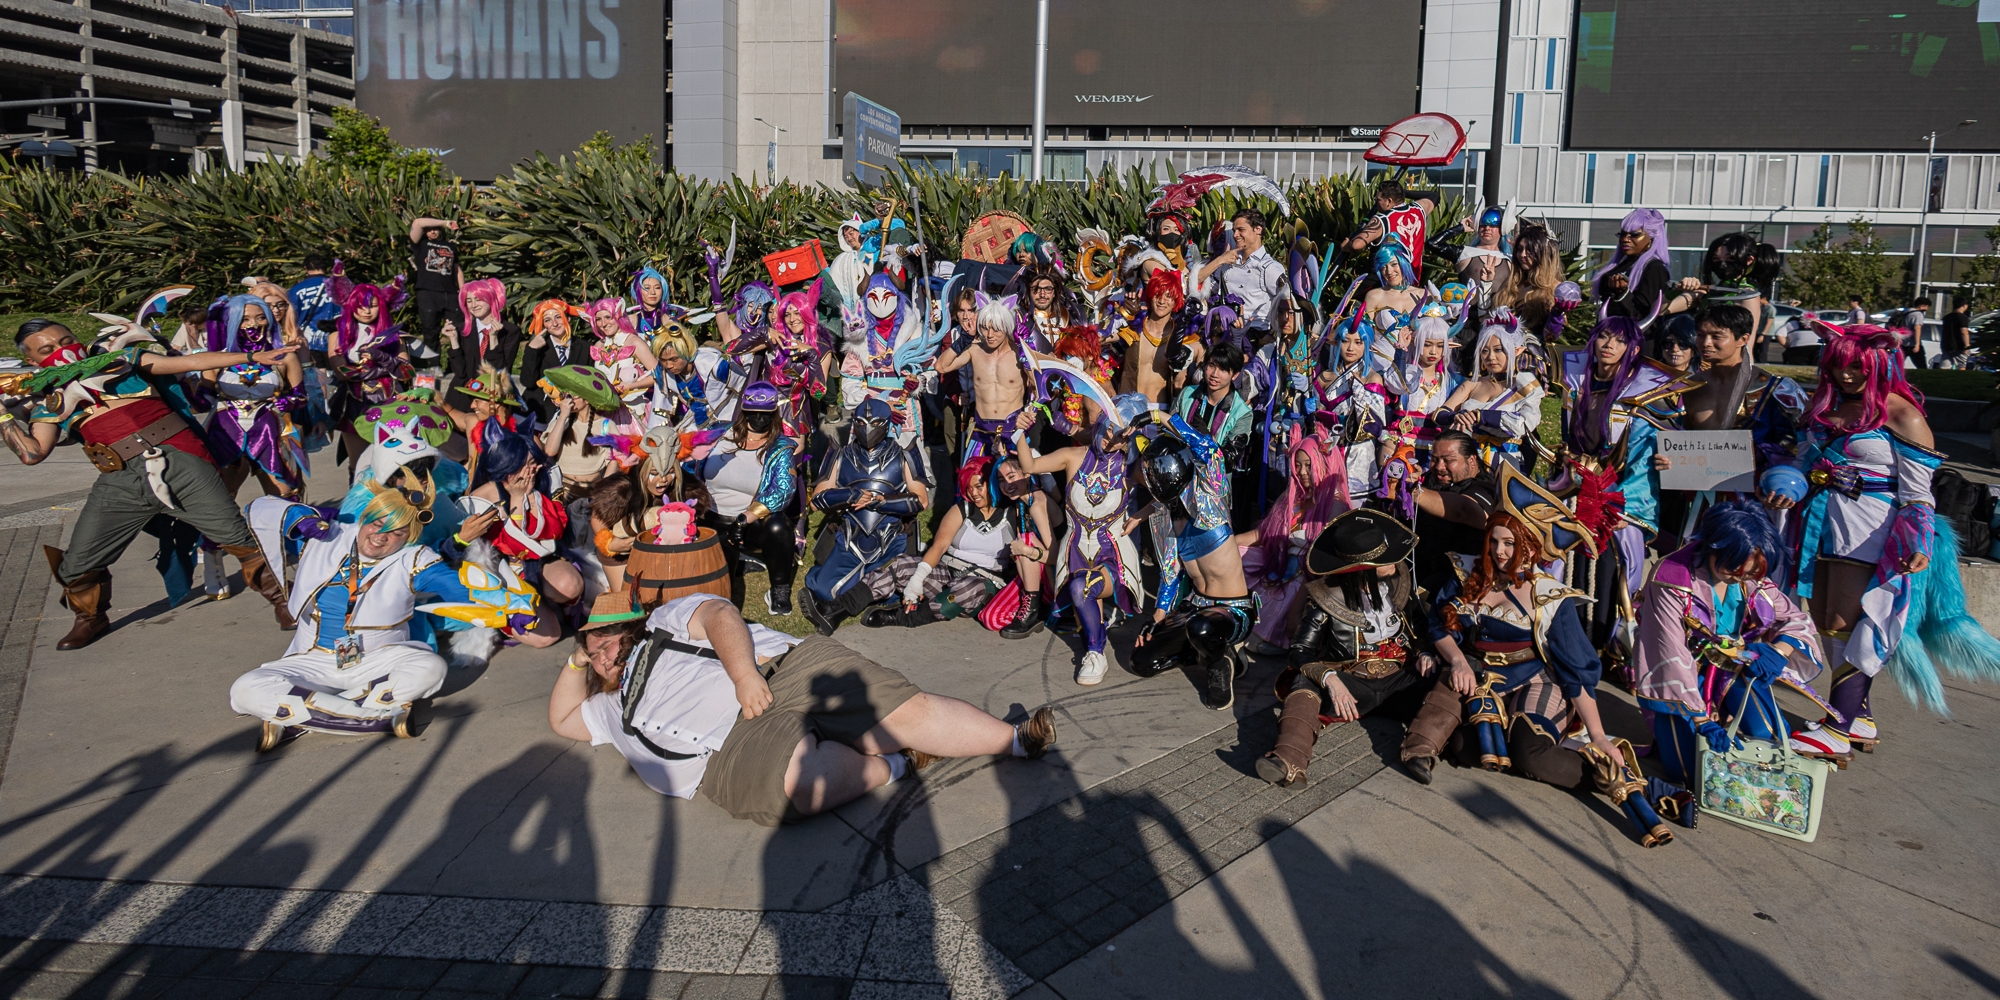 Details more than 131 anime expo cosplay gatherings latest - ceg.edu.vn